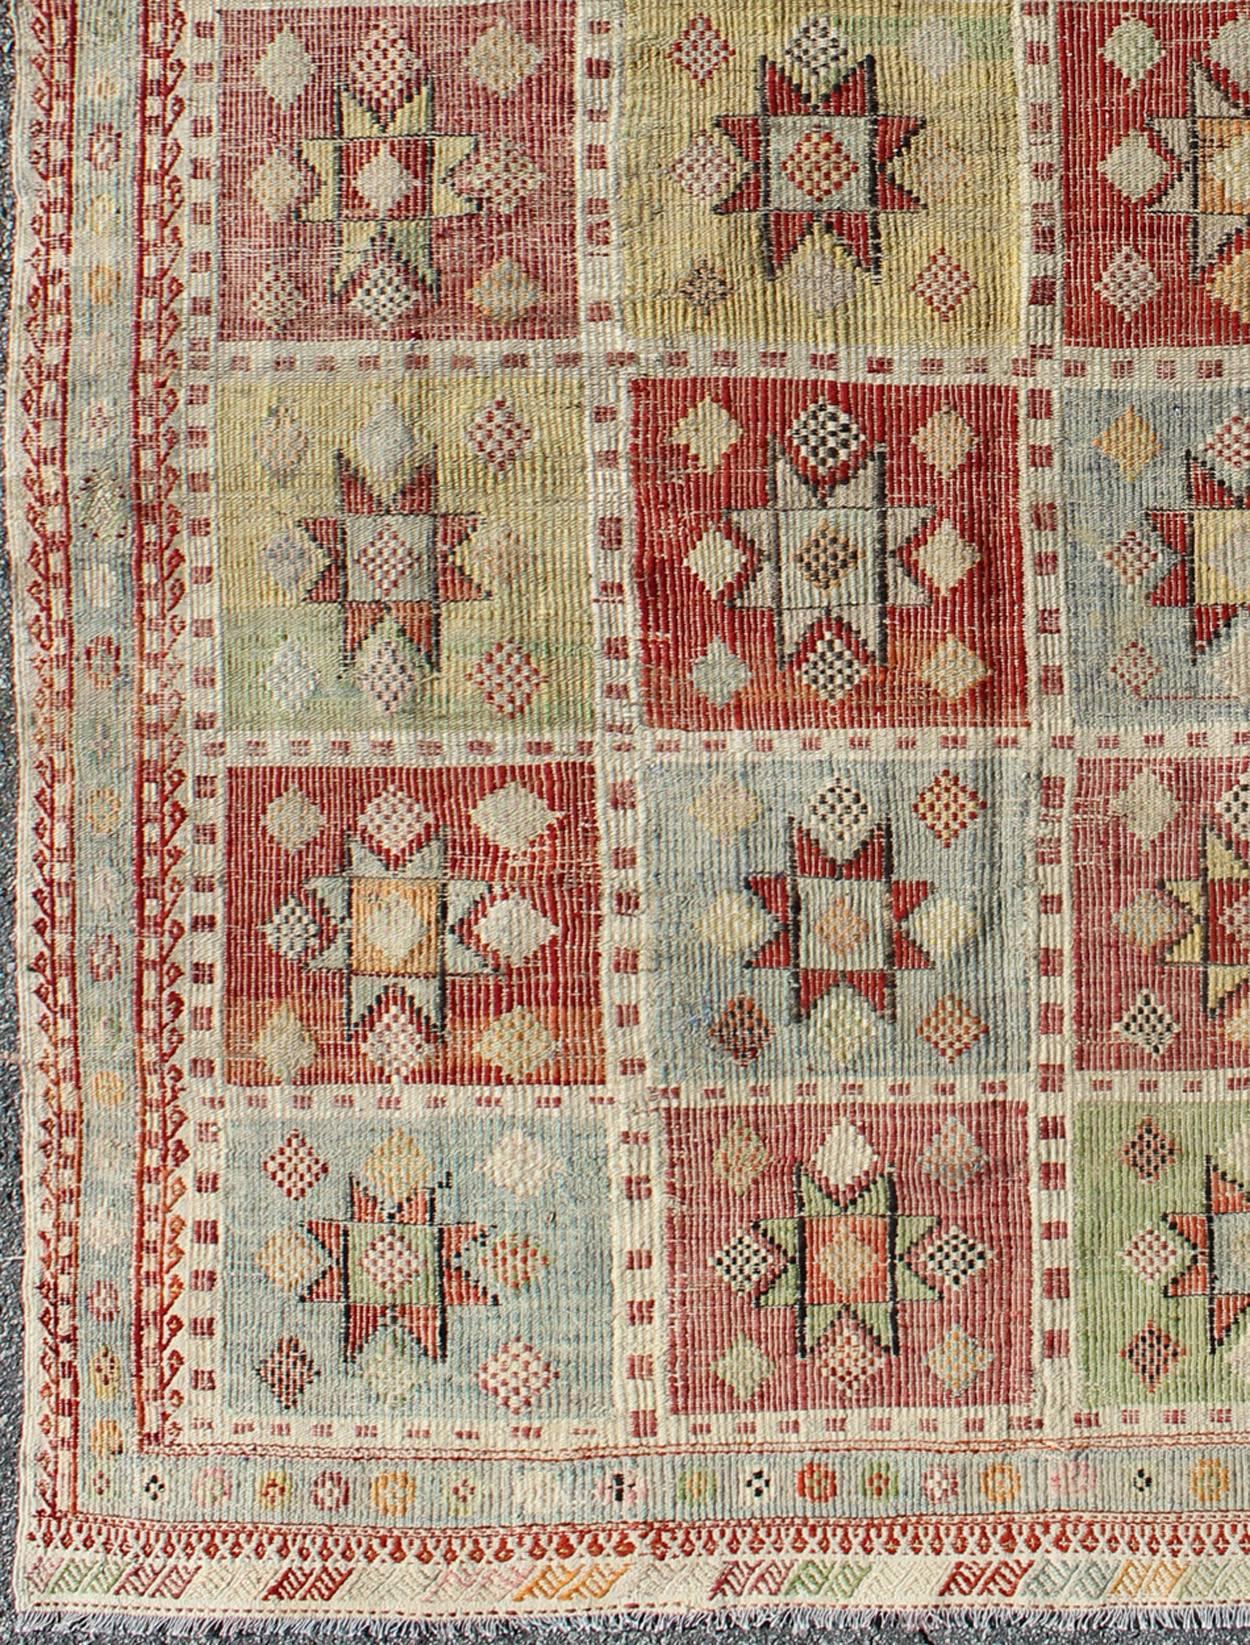 Midcentury Geometric checkerboard Turkish embroidered flat-weave rug with stars. Vintage Geometric checkerboard Turkish Kilim rug with multicolored stars, rug tu-ned-1112, country of origin / type: Turkey / Oushak, circa 1950.

Featuring an all-over